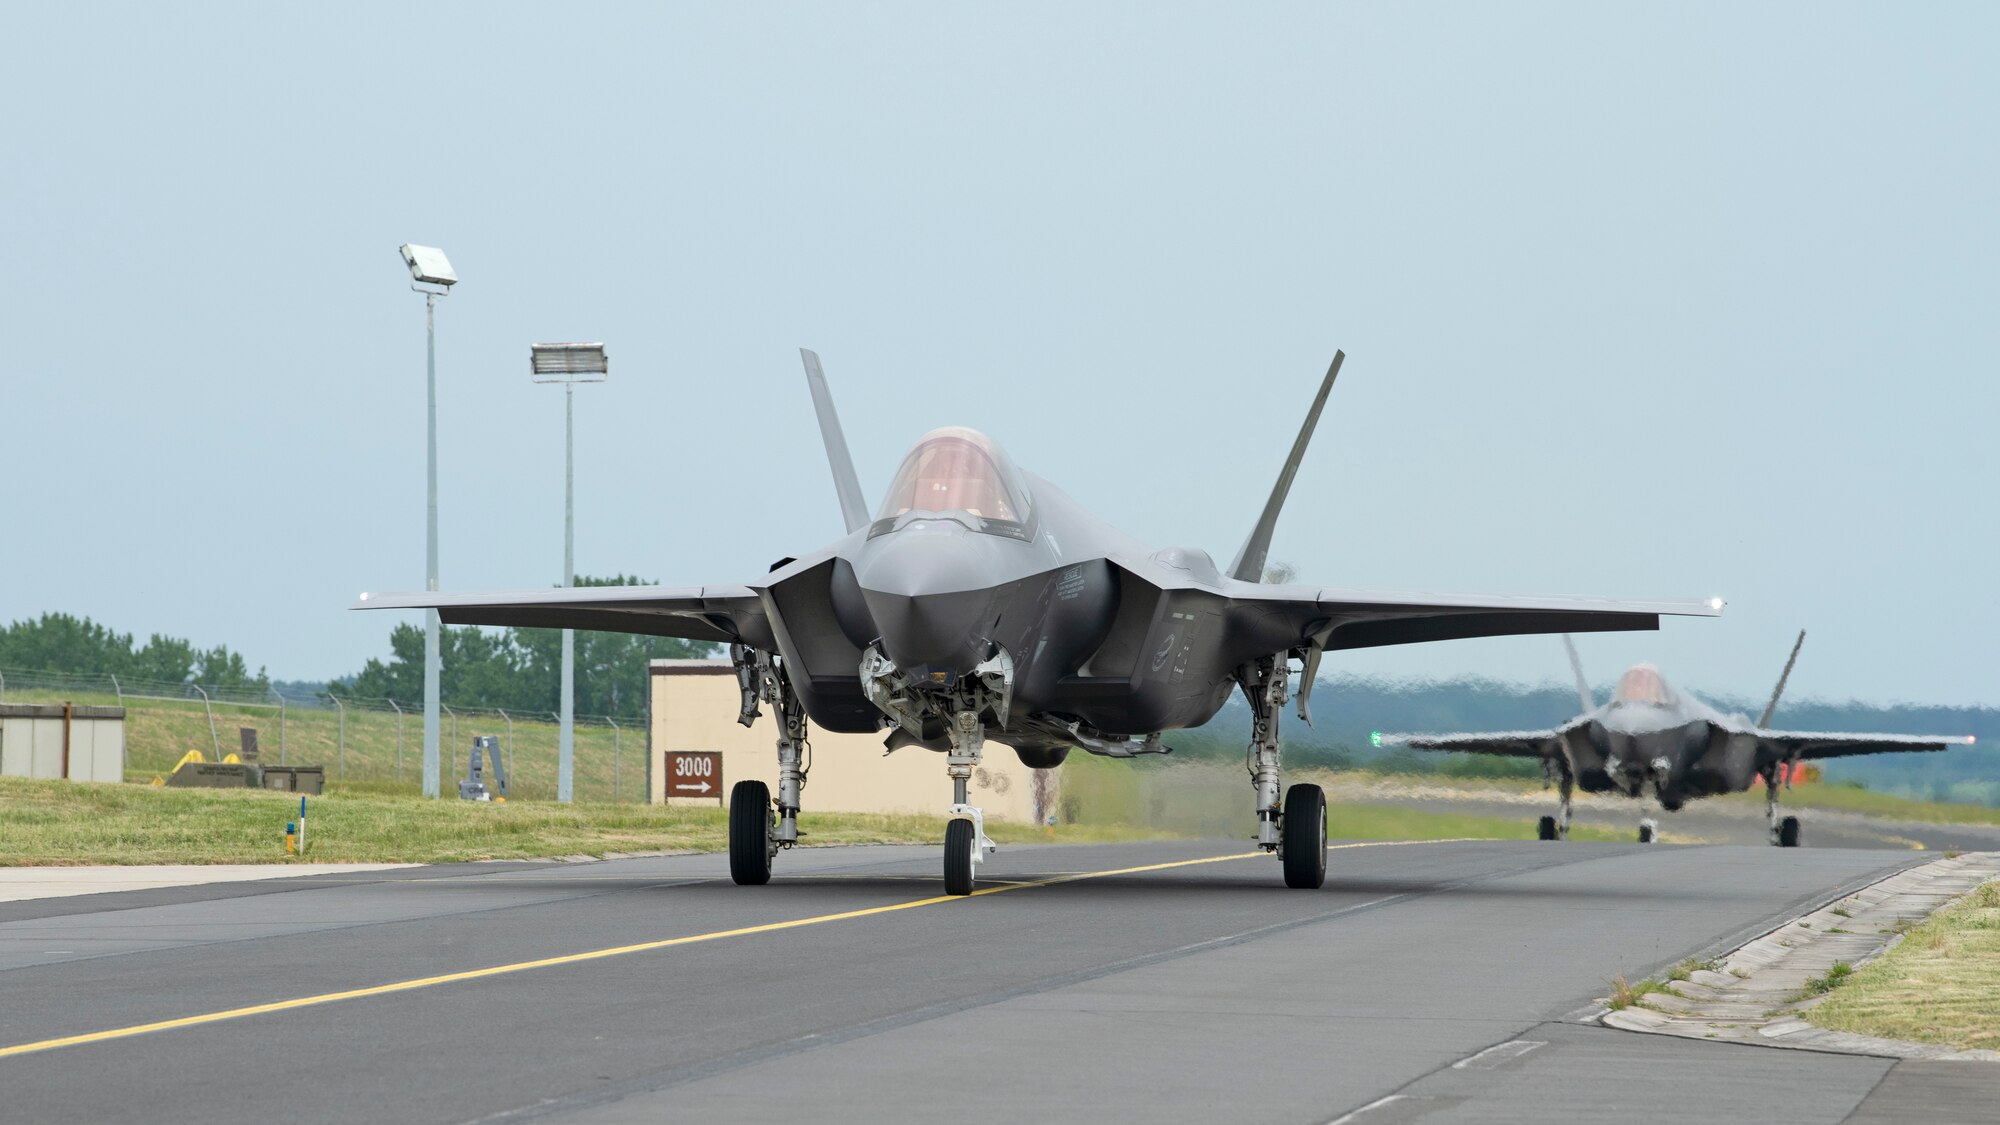 Two F-35A Lightning II aircraft assigned to the 315th Fighter Squadron taxi at Spangdahlem Air Base, Germany, June 3, 2022. Airmen from the Vermont Air National Guard's 158th Fighter Wing are deployed to Spangdahlem in support of NATO's air policing mission. (U.S. Air Force photo by Tech. Sgt. Anthony Plyler)